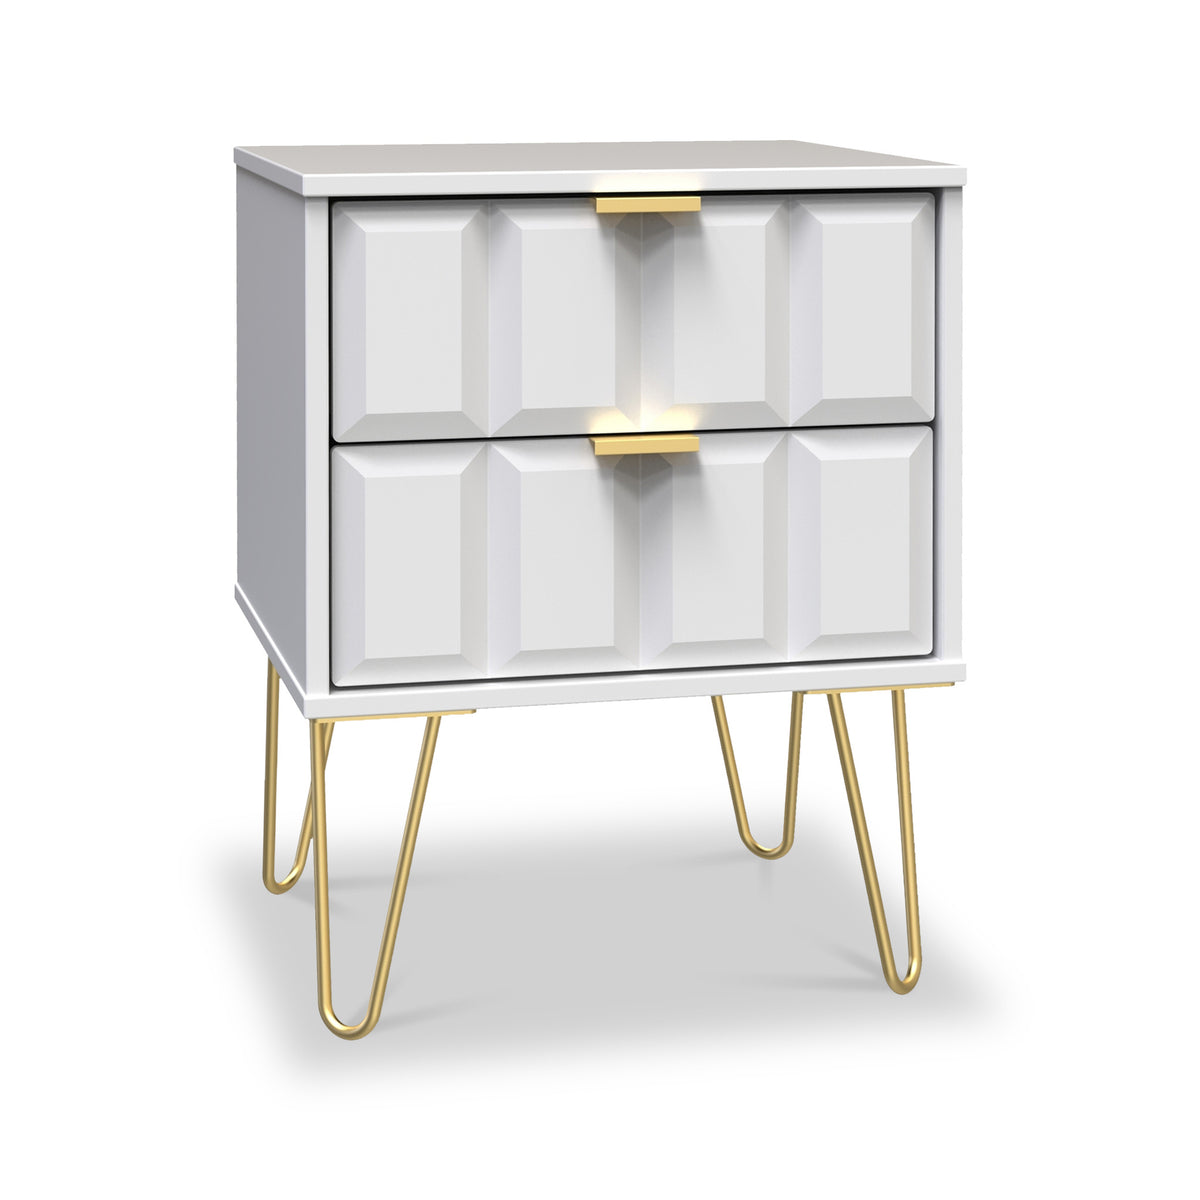 Harlow White 2 Drawer Bedside with Gold Hairpin Legs from Roseland